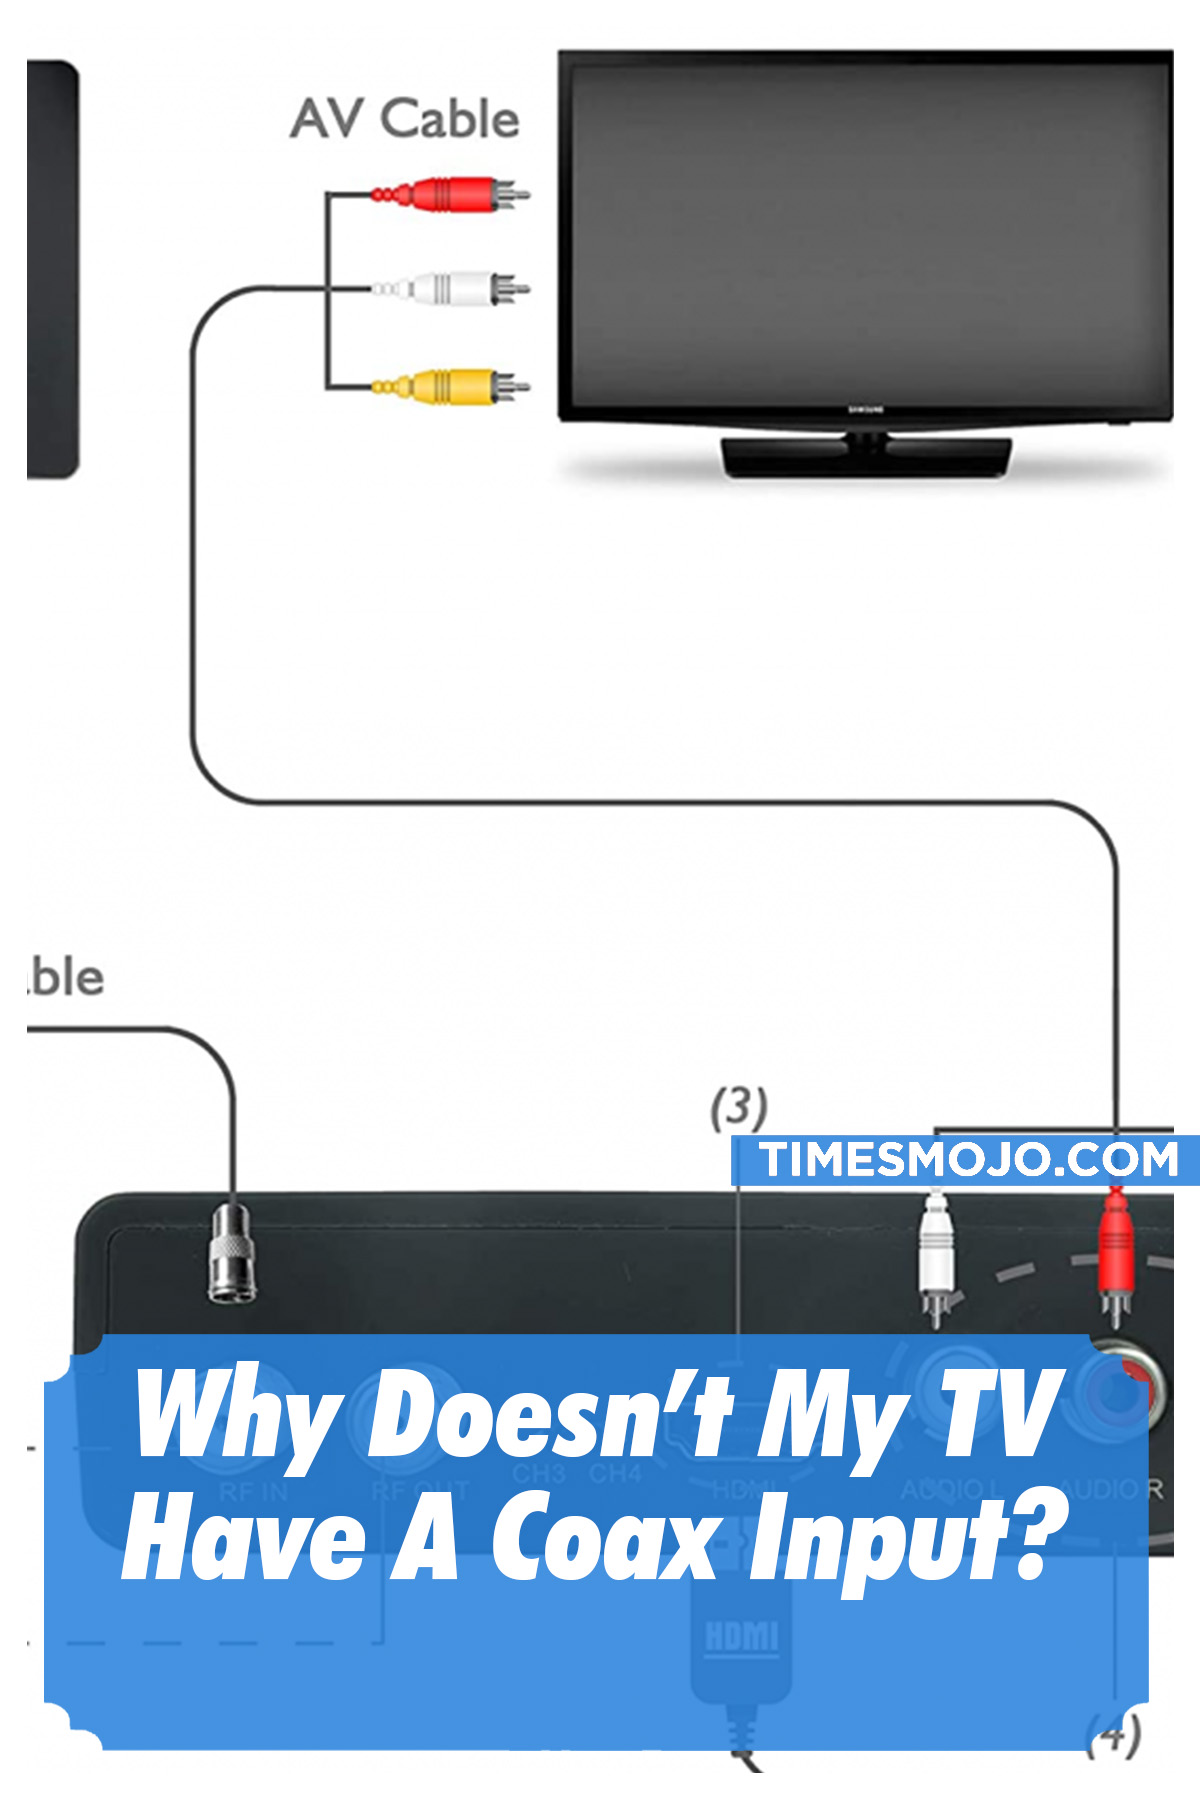 Why Doesn’t My TV Have A Coax Input